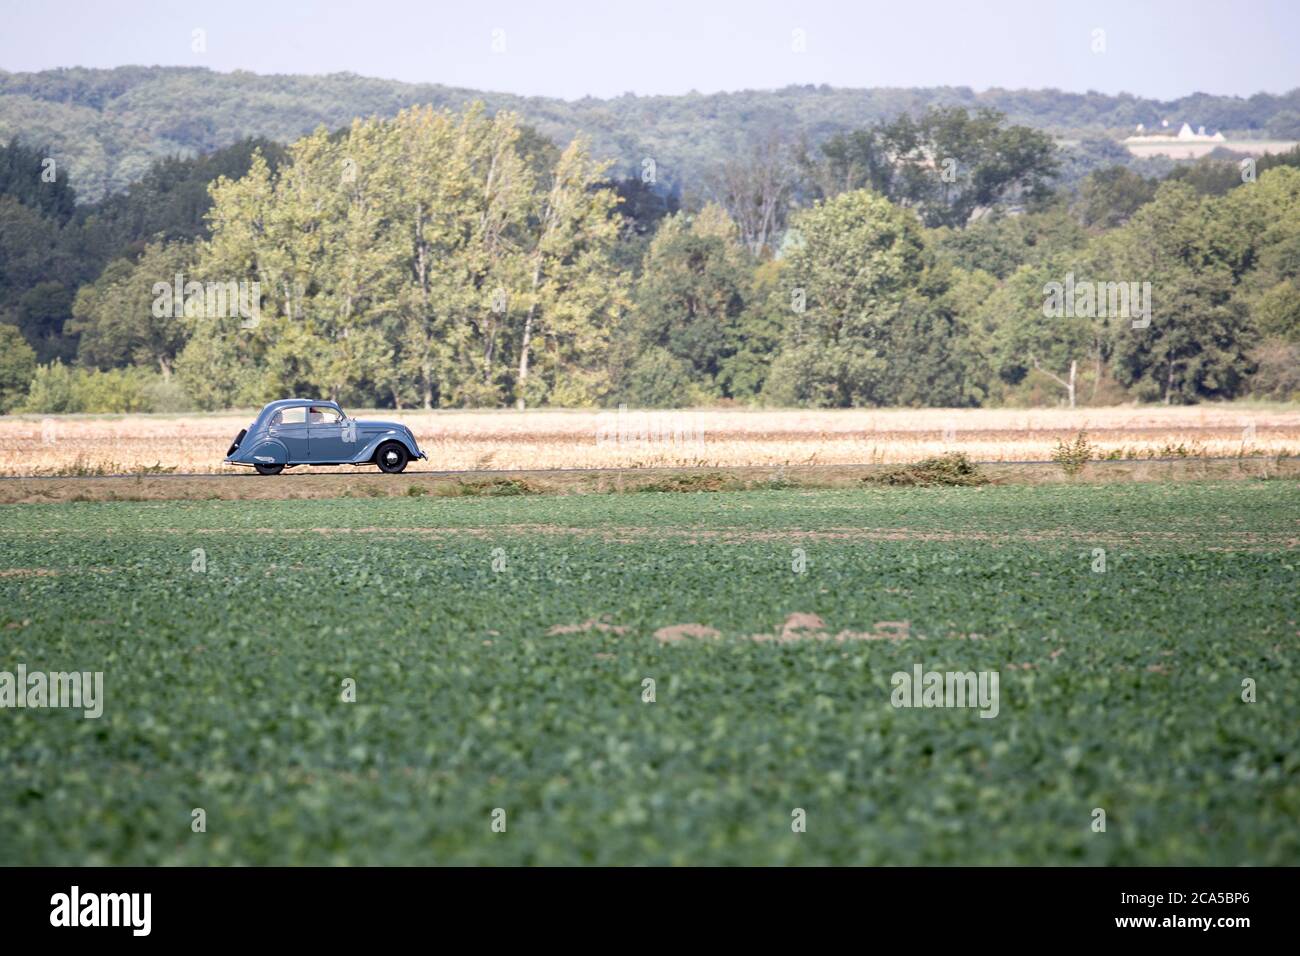 France, Loir et Cher, Loire valley listed as World Heritage by UNESCO, Couture-sur-Loir, Peugeot 201 driving on the road Stock Photo